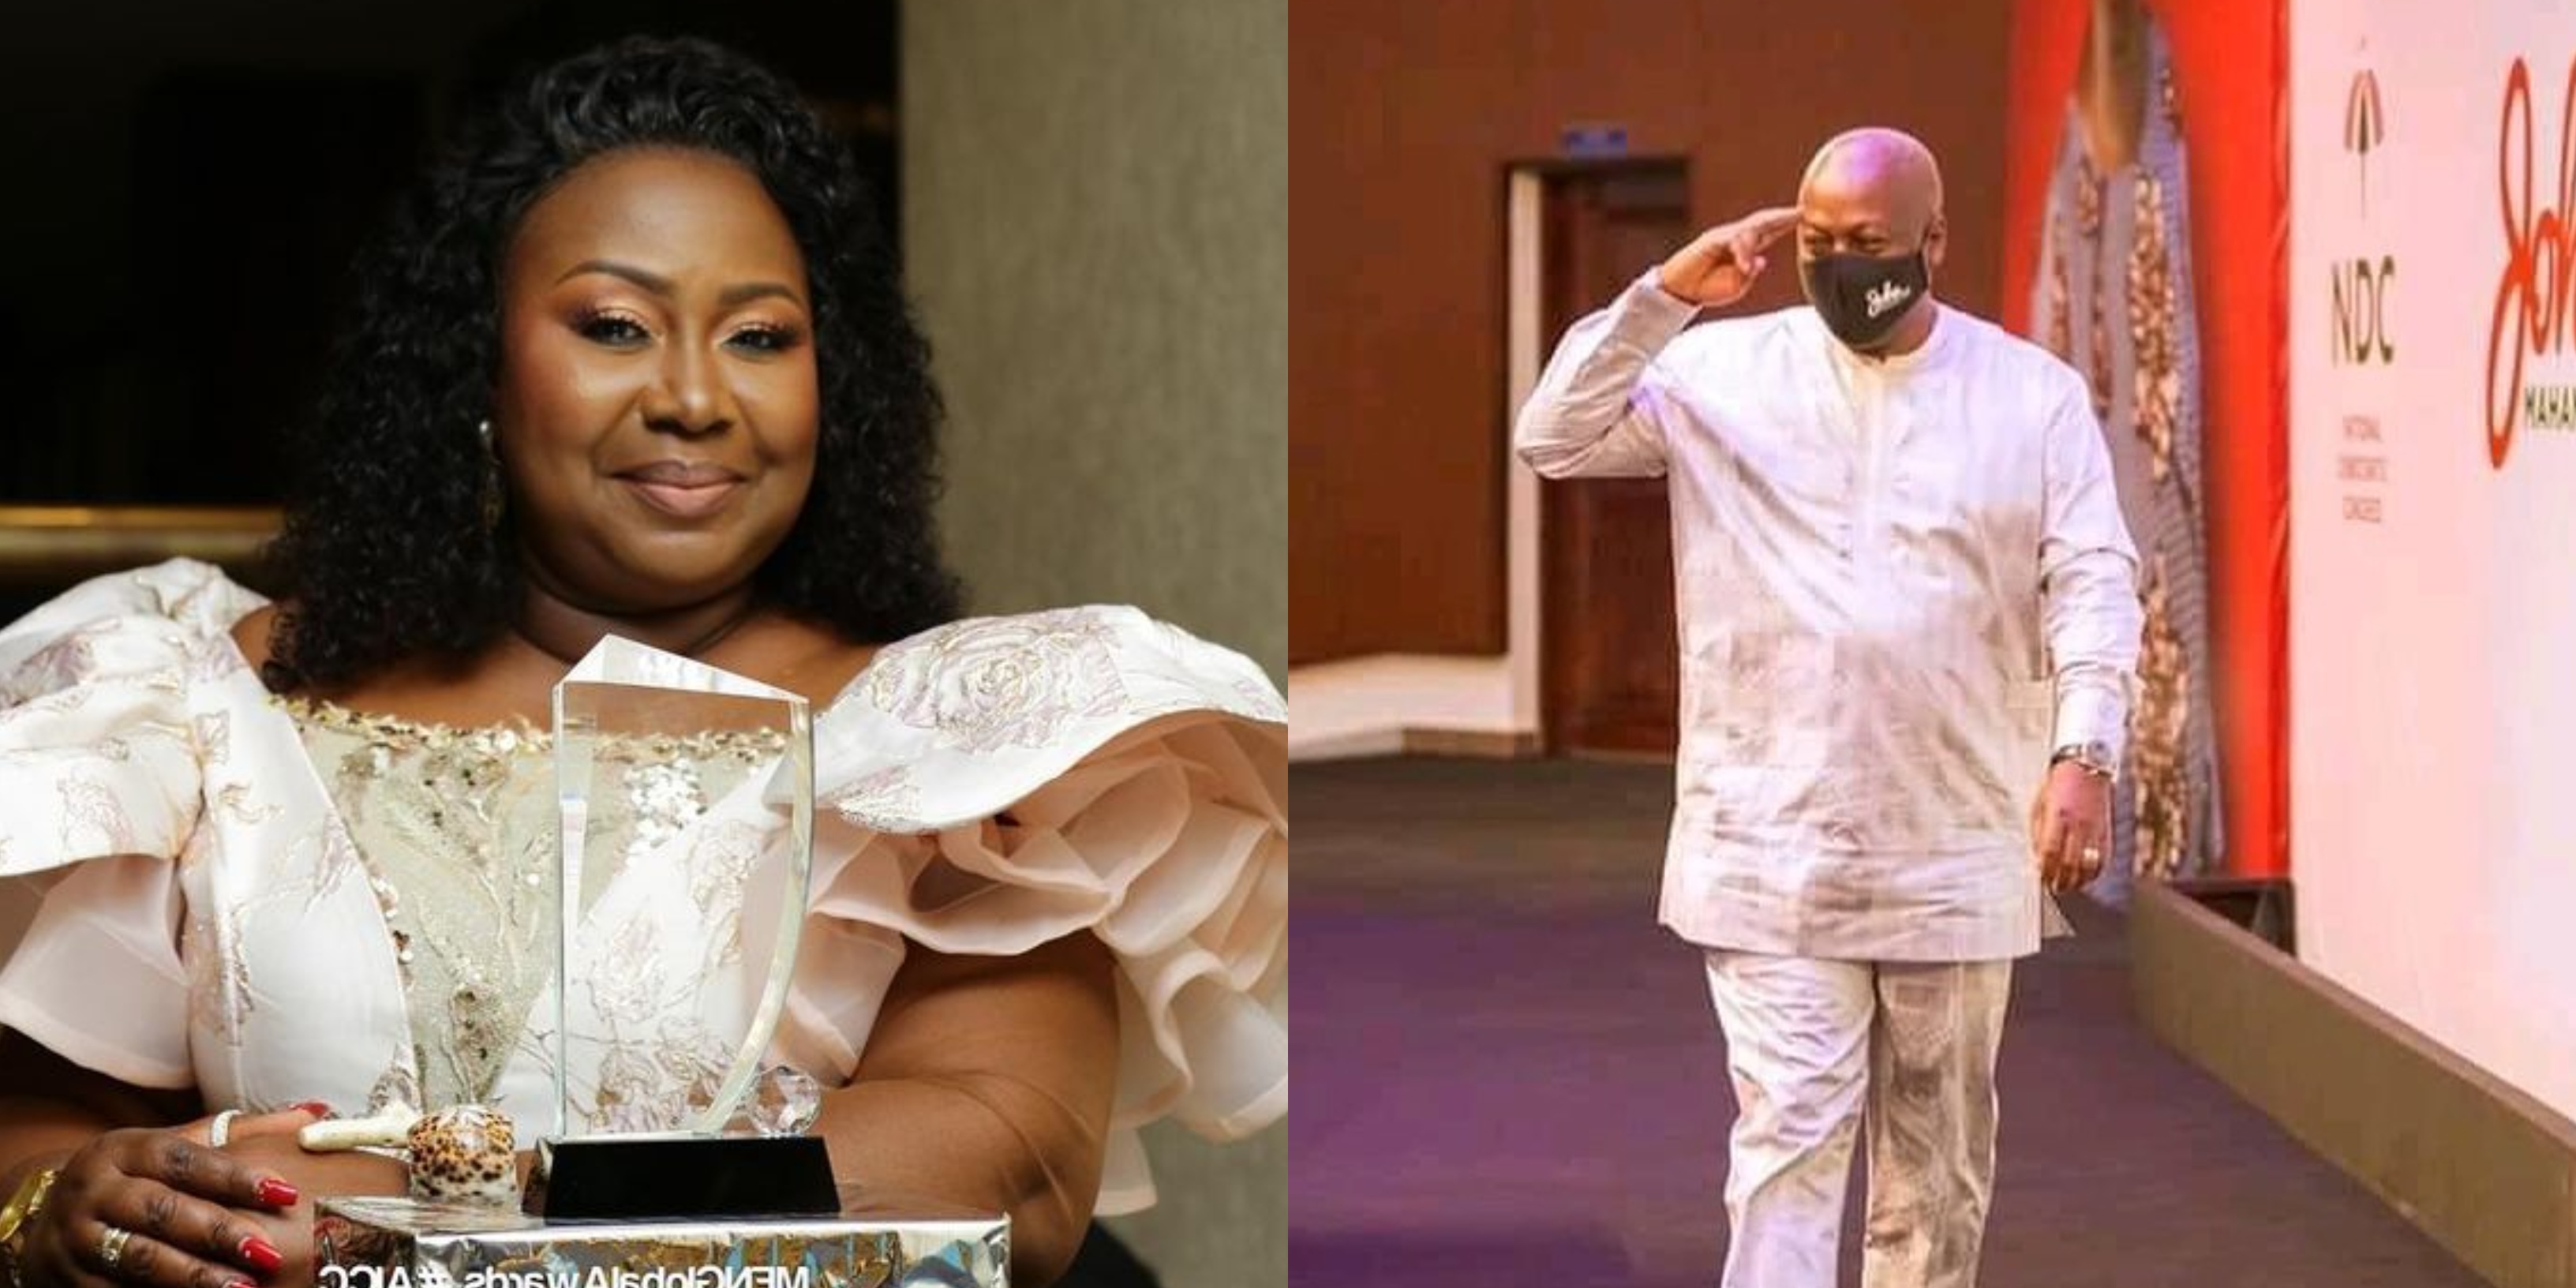 Election 2020: Gifty Anti heaps praises on John Mahama after lsoing to Akufo-Addo for the 2nd time